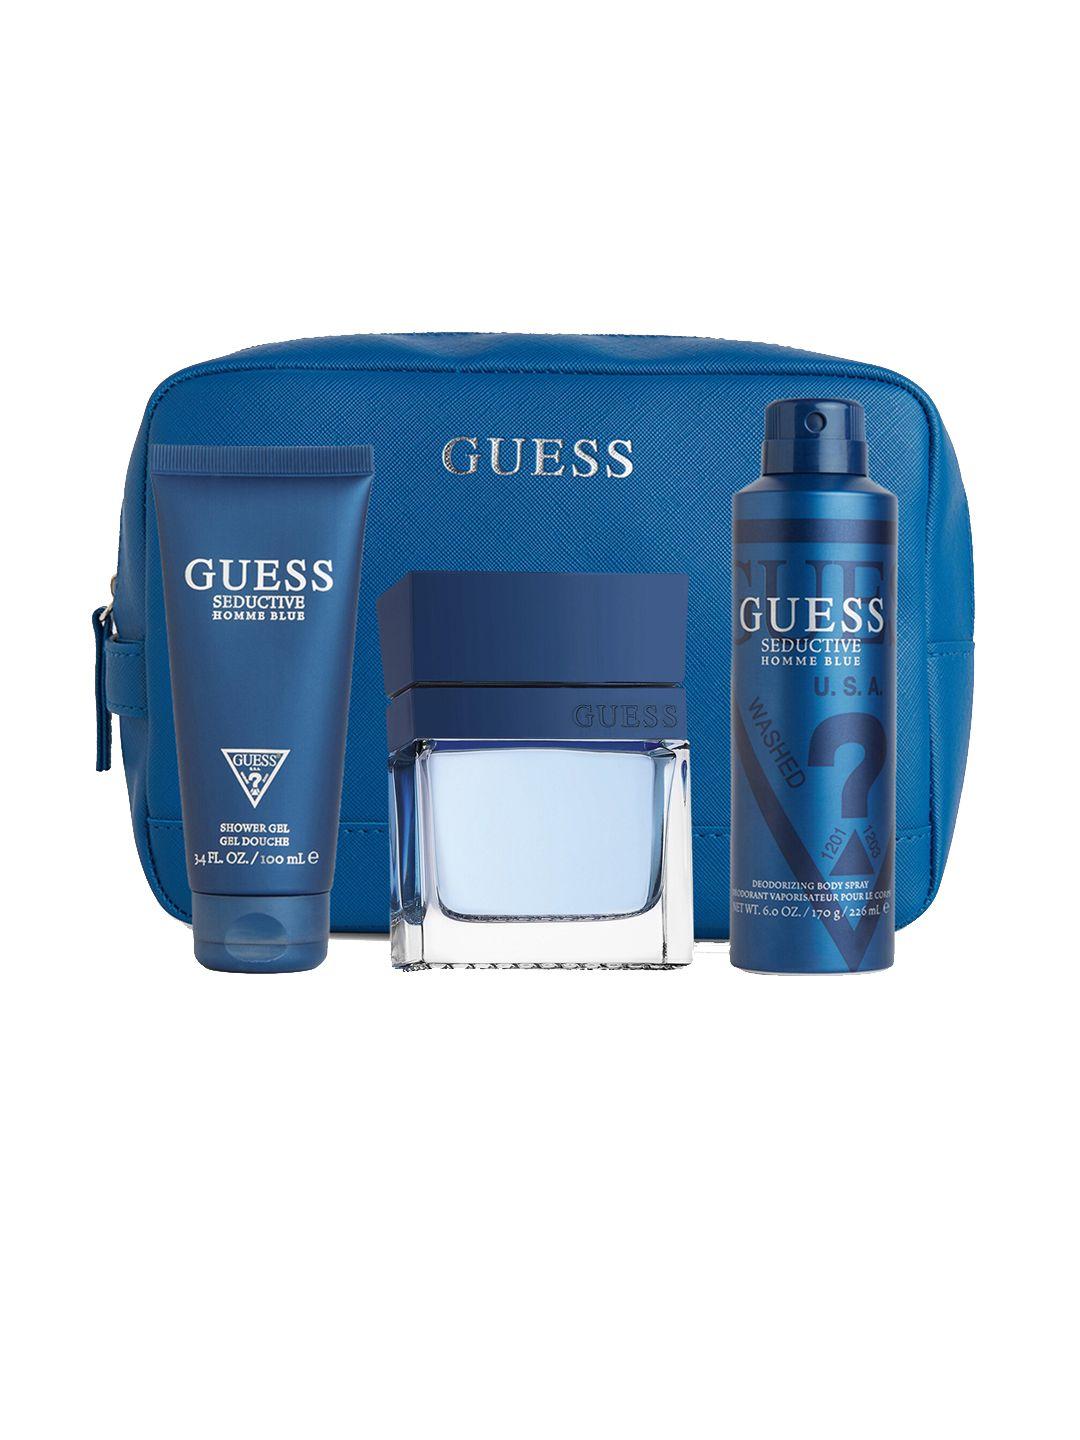 guess seductive homme men gift set edt 100ml- shower gel 100ml & body spray170g with pouch